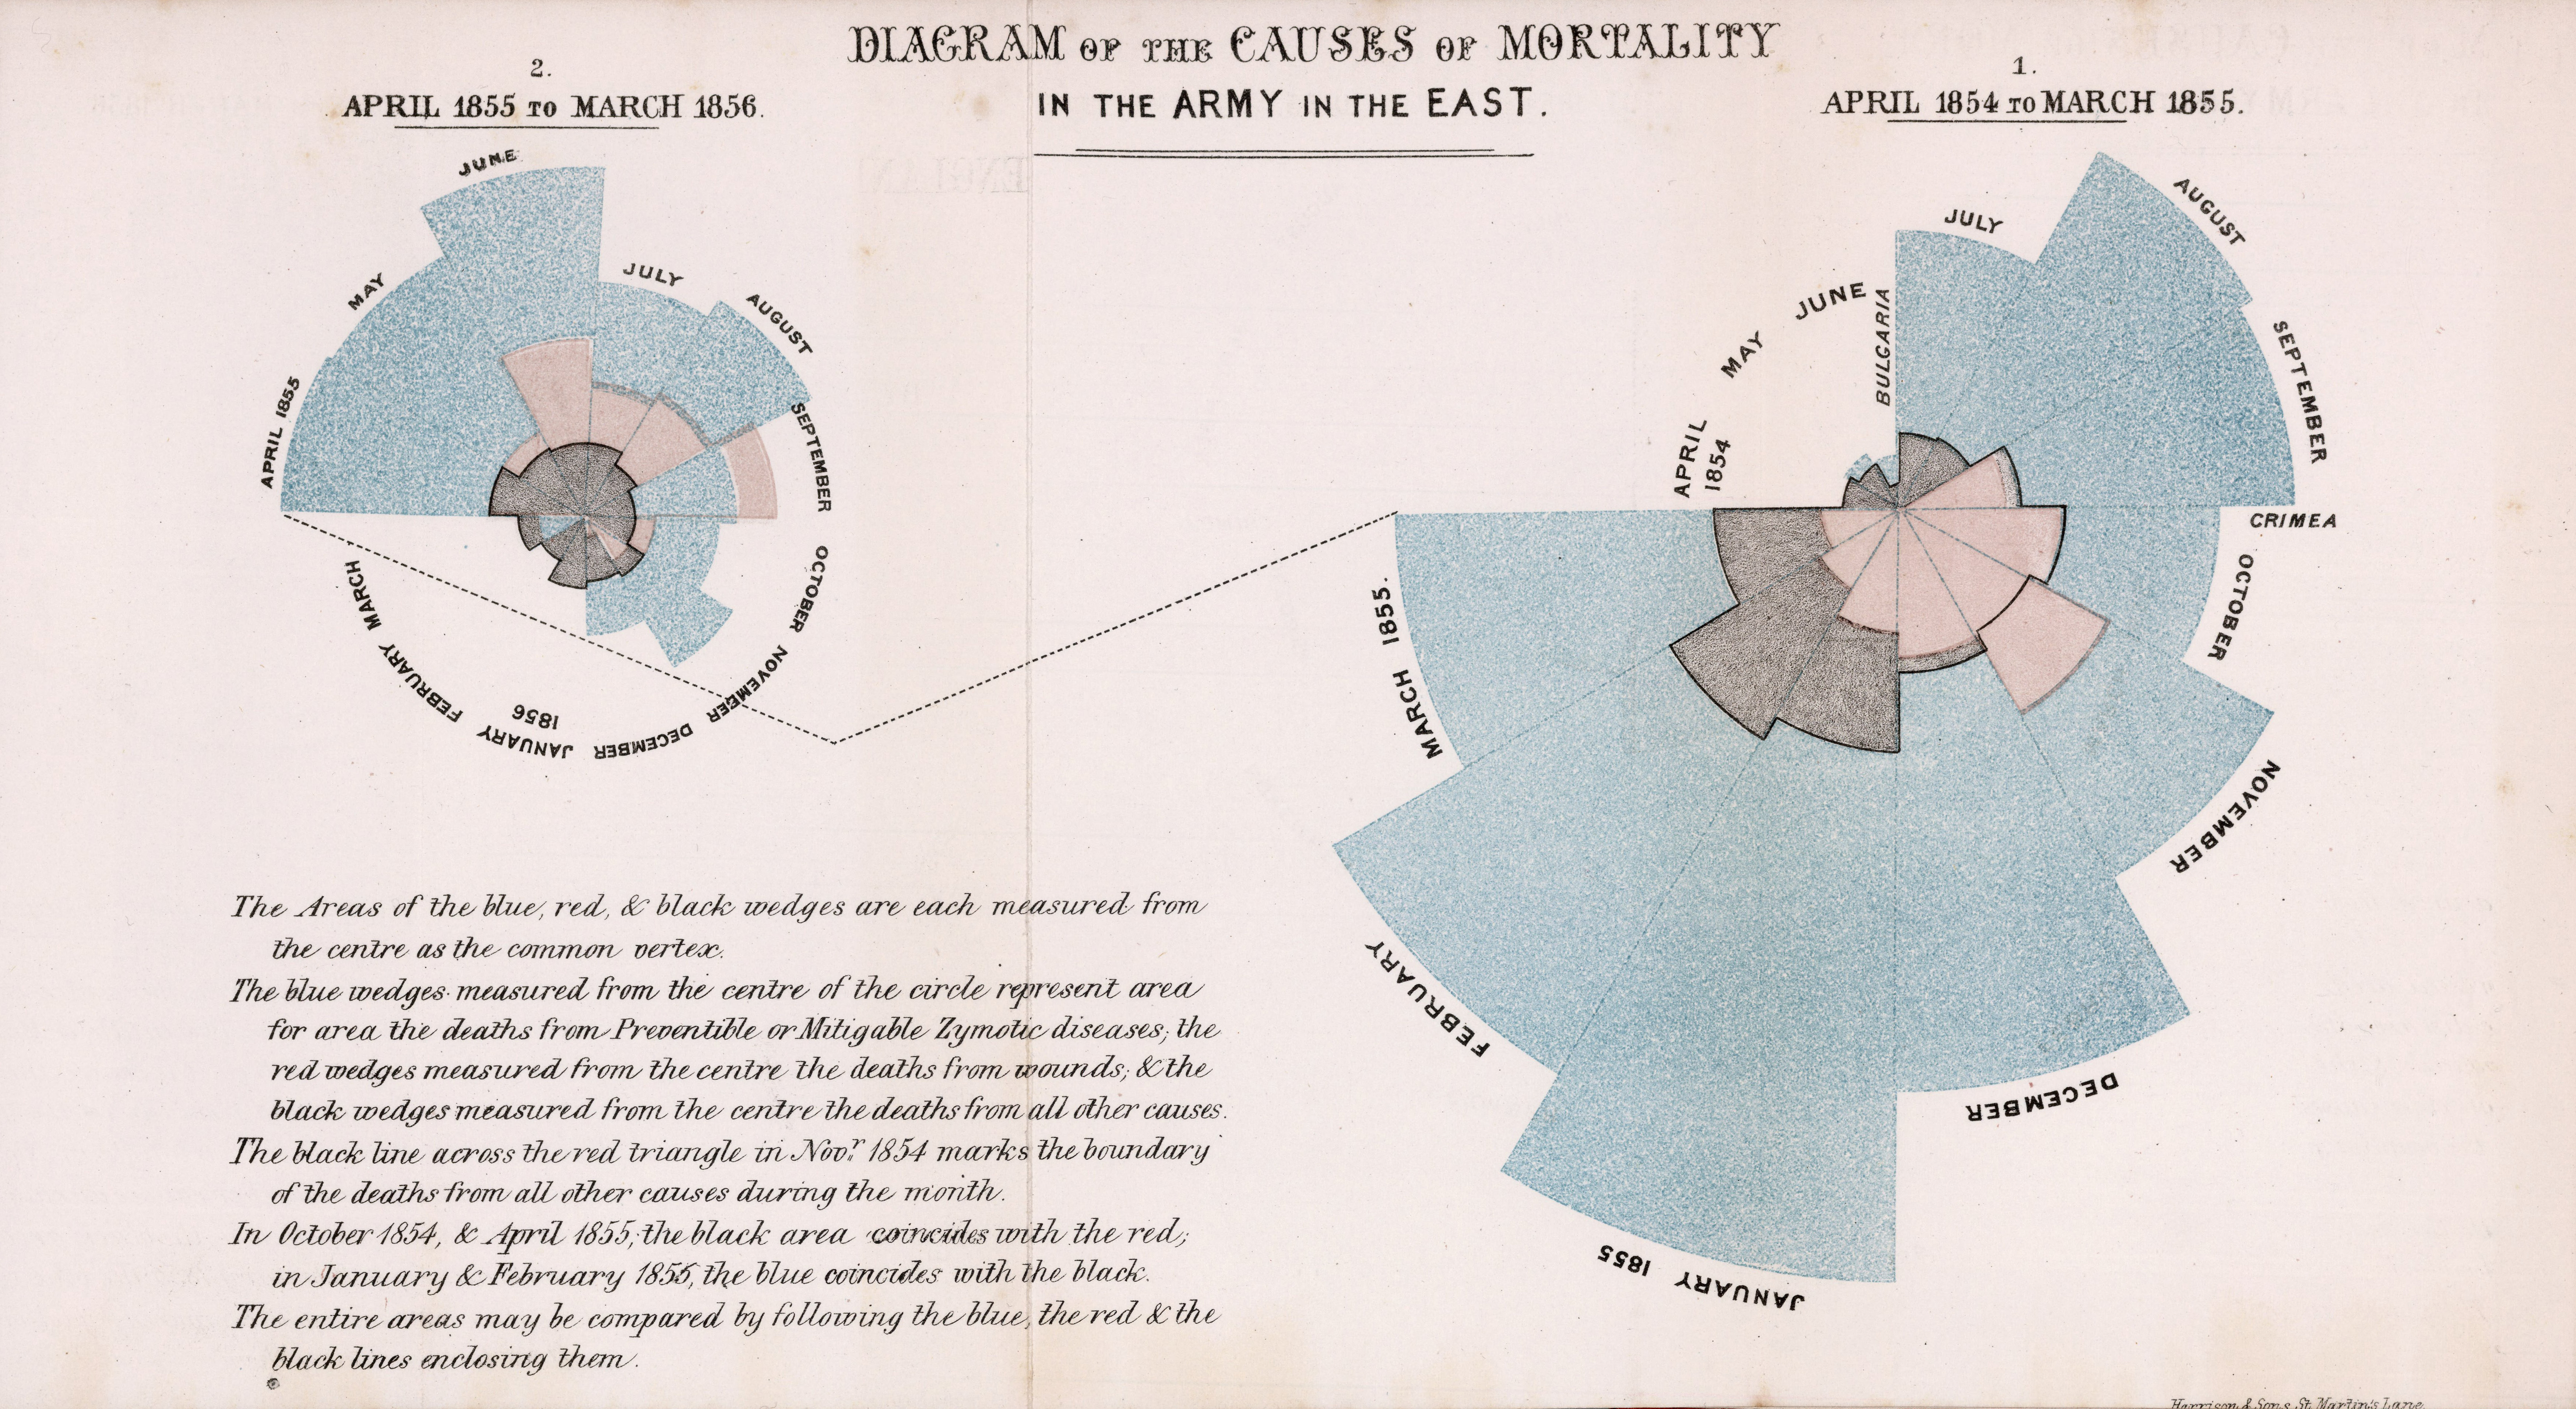 Image credit: Florence Nightingale, work is in the public domain 